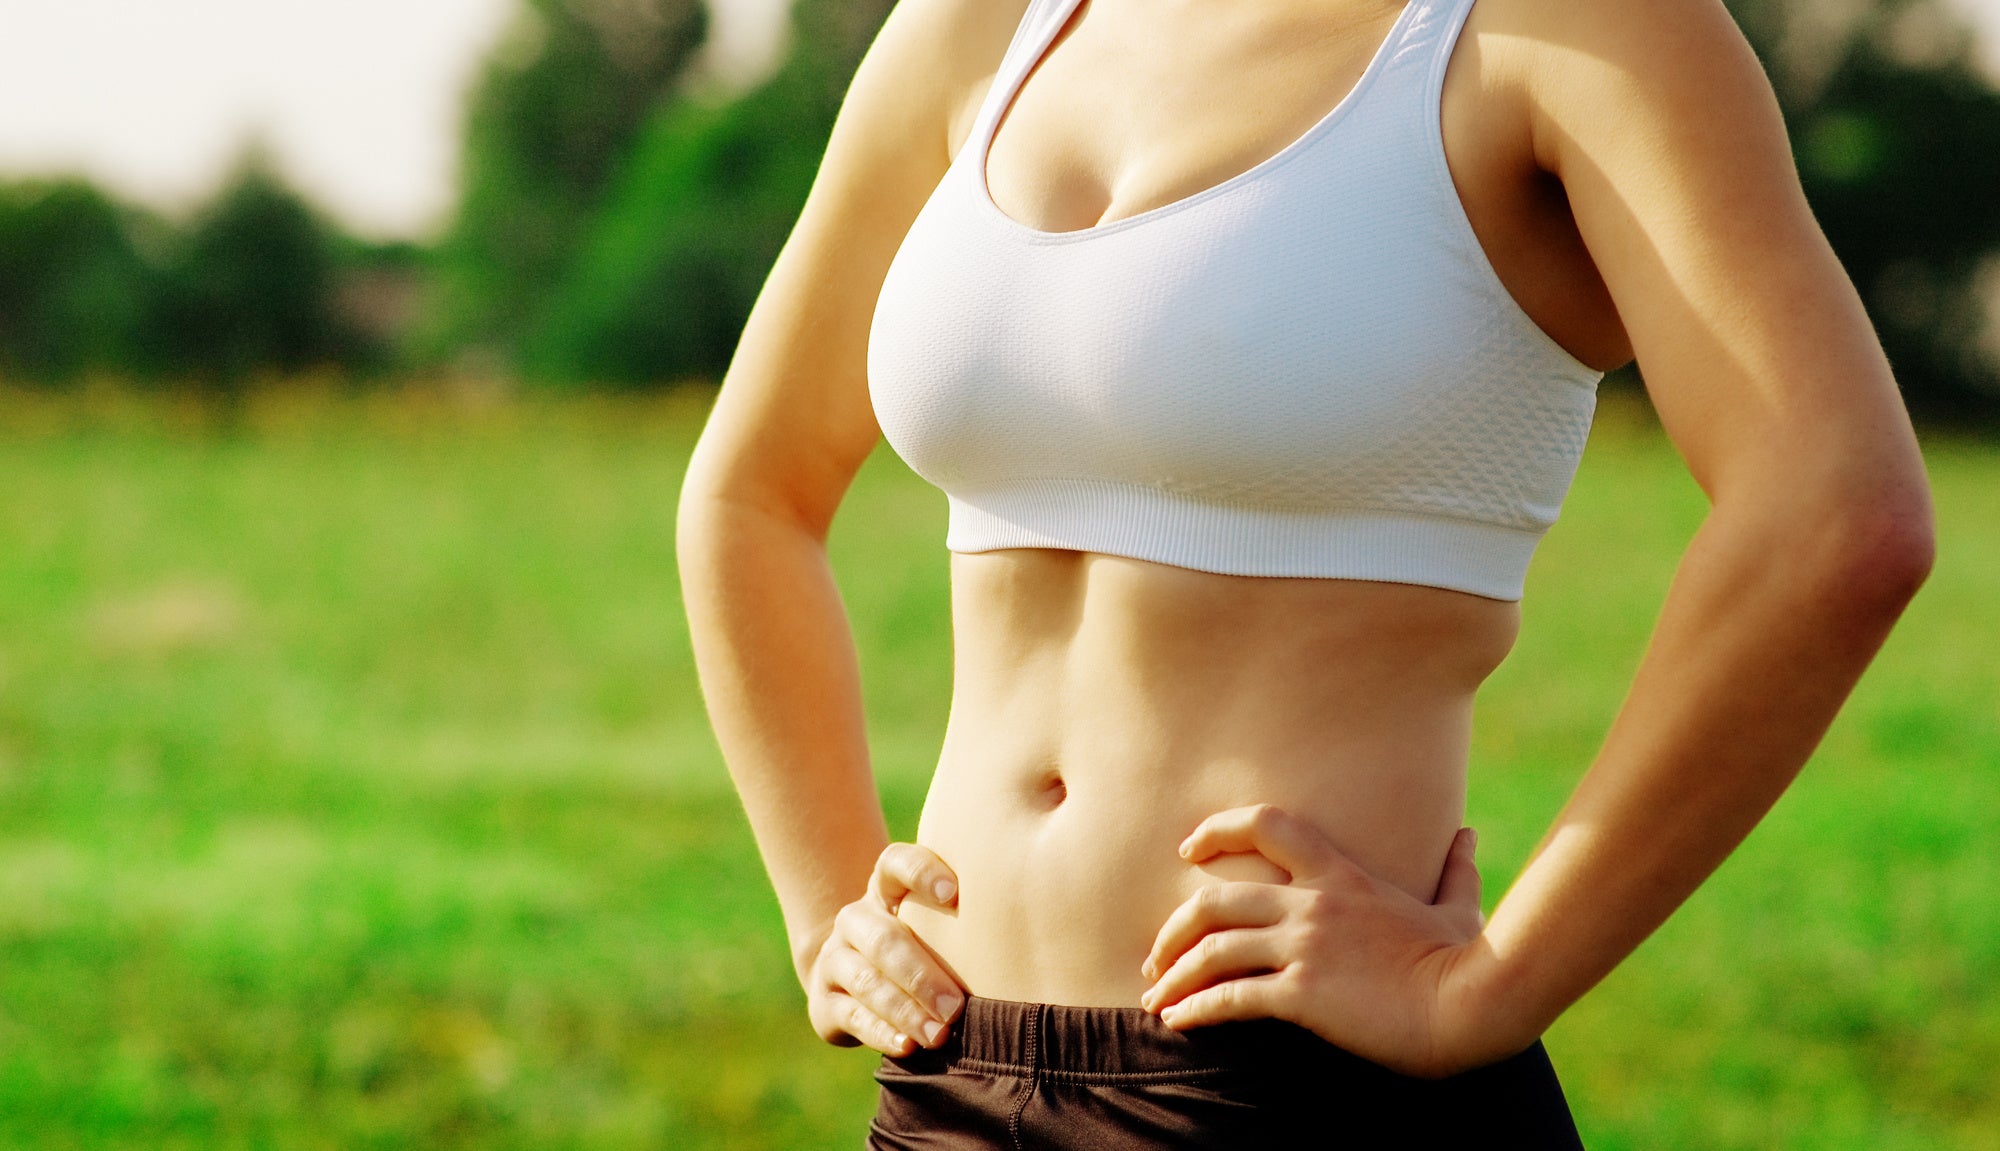 How to Prevent Sports Bra Chafing